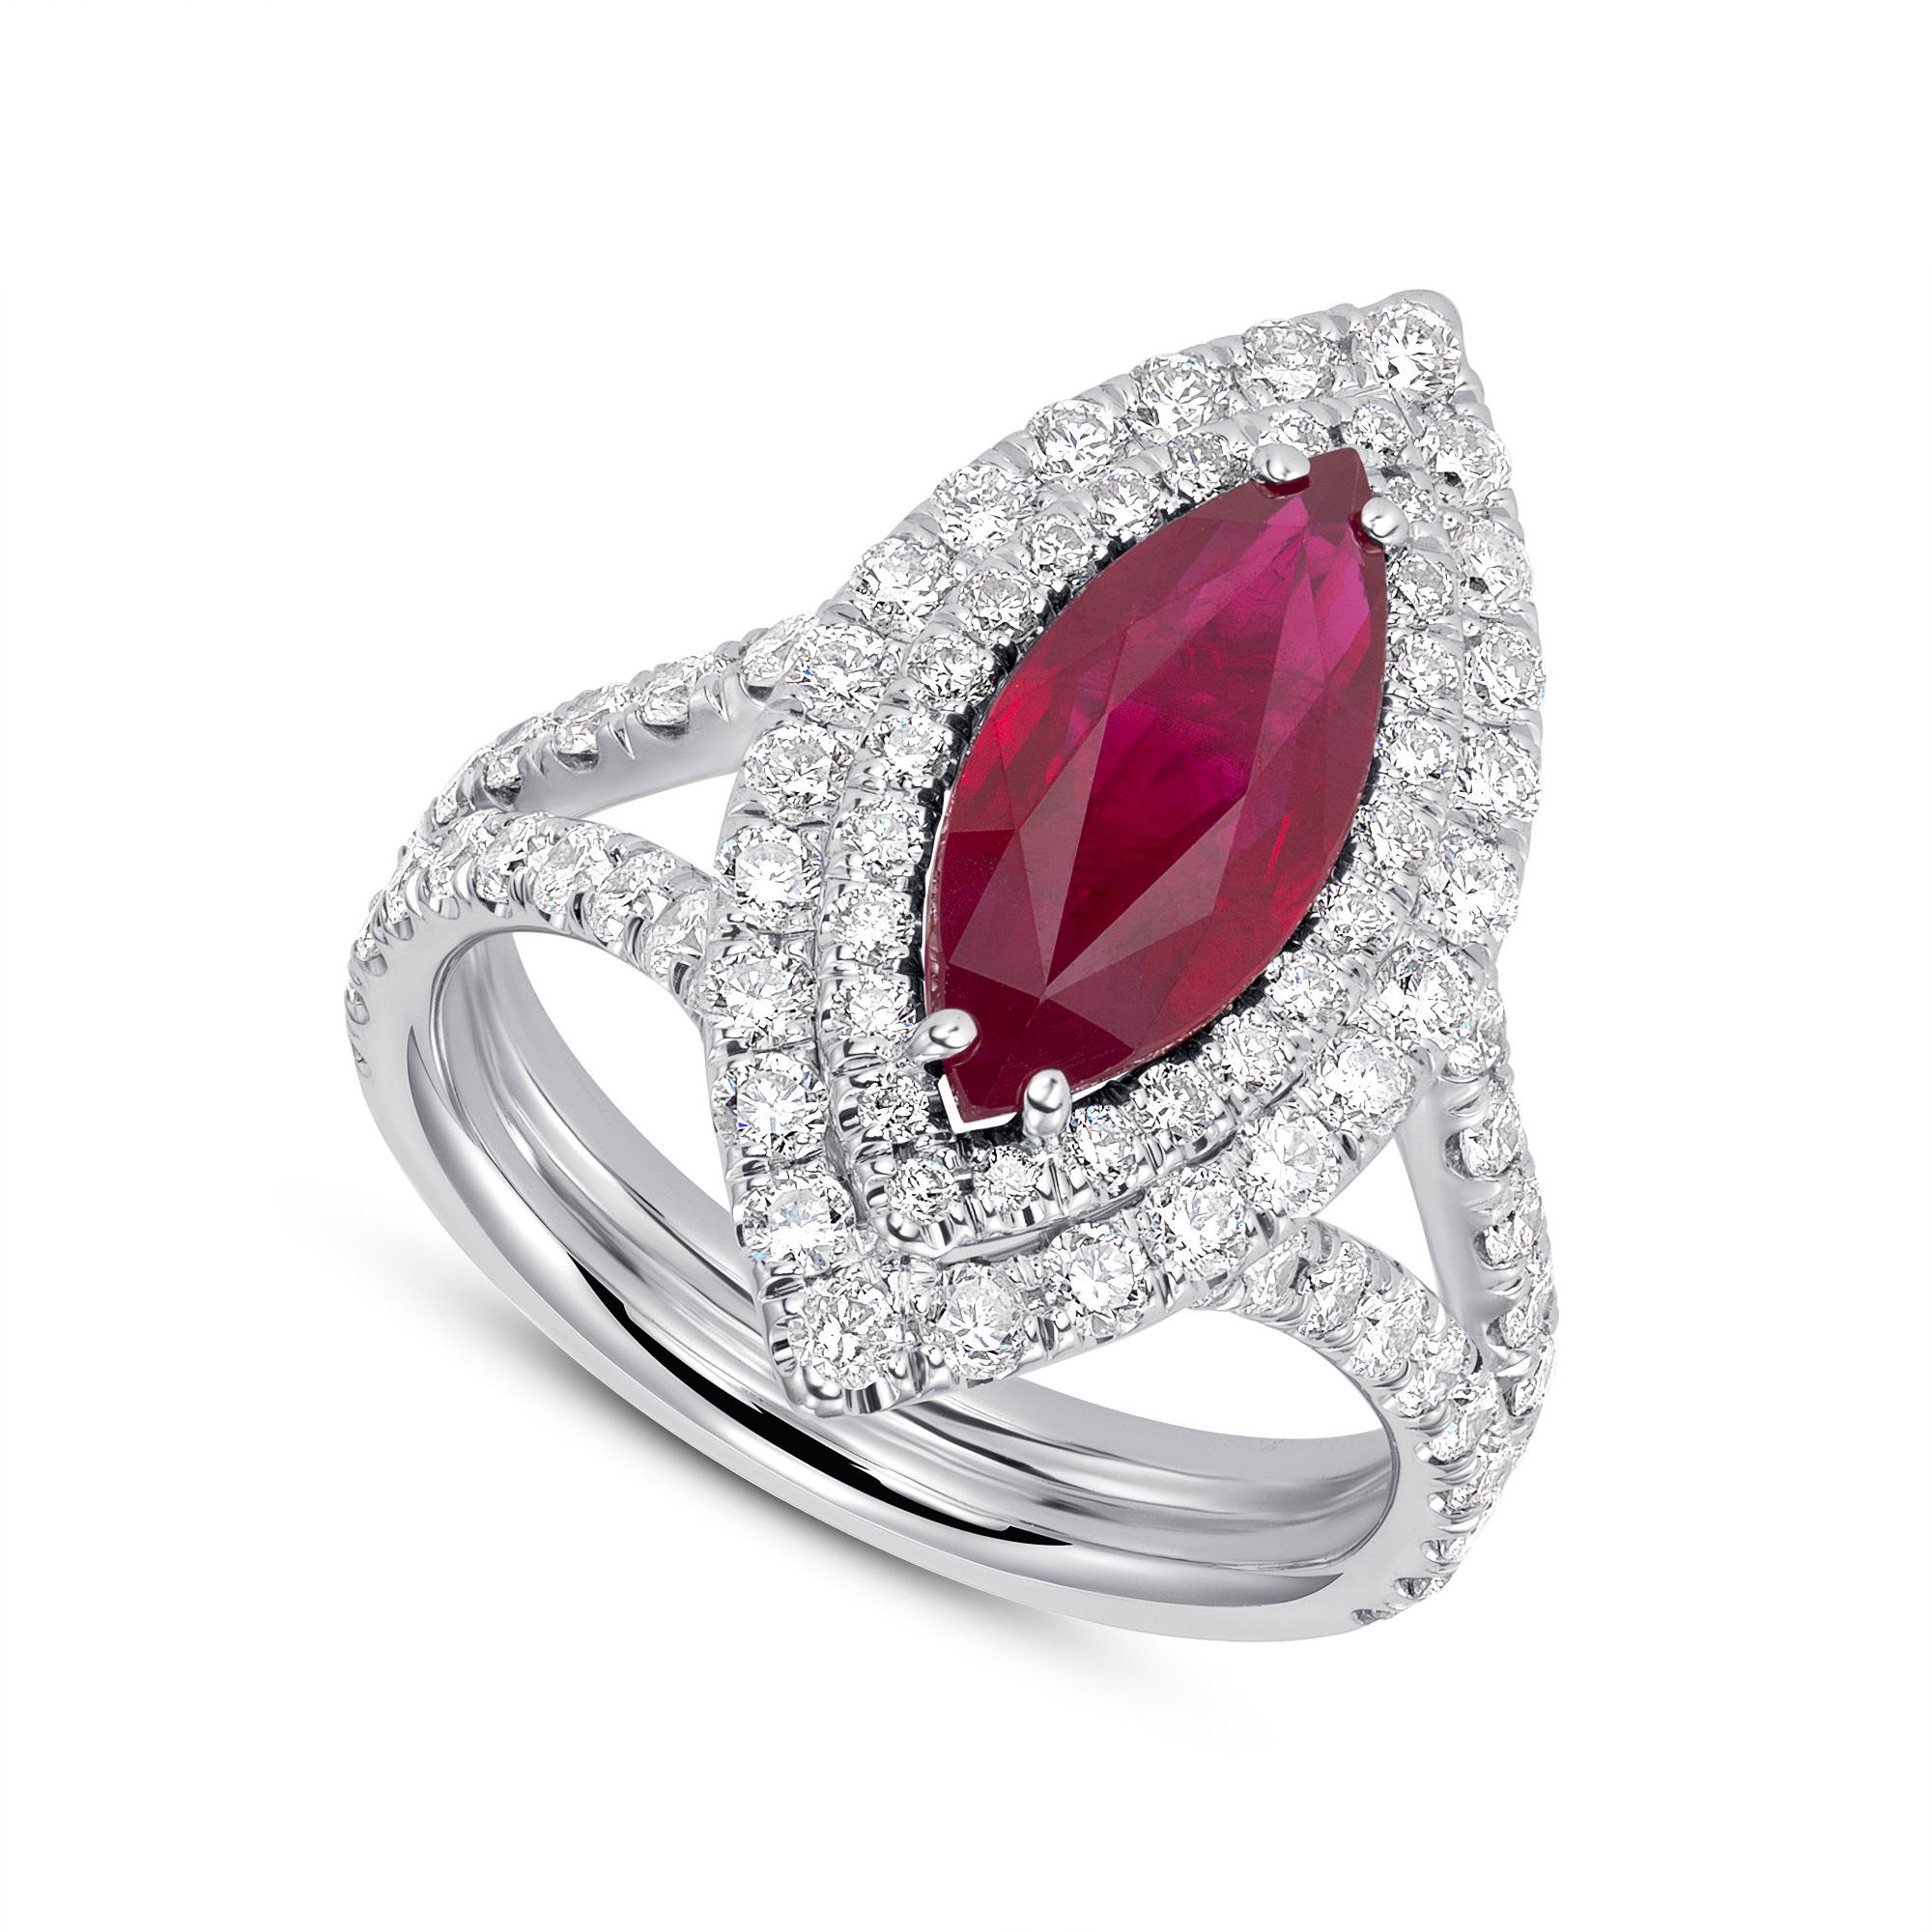 18K White Gold Ring 7.26gm / Diamond 1.33ct / NATURAL Ruby 2.31ct
Crafted in 18K white gold with natural marquise-shaped 2.31ct Ruby, Instilling an open-hearted readiness to take any risks necessary to advance and vibrate with life-affirming zeal.